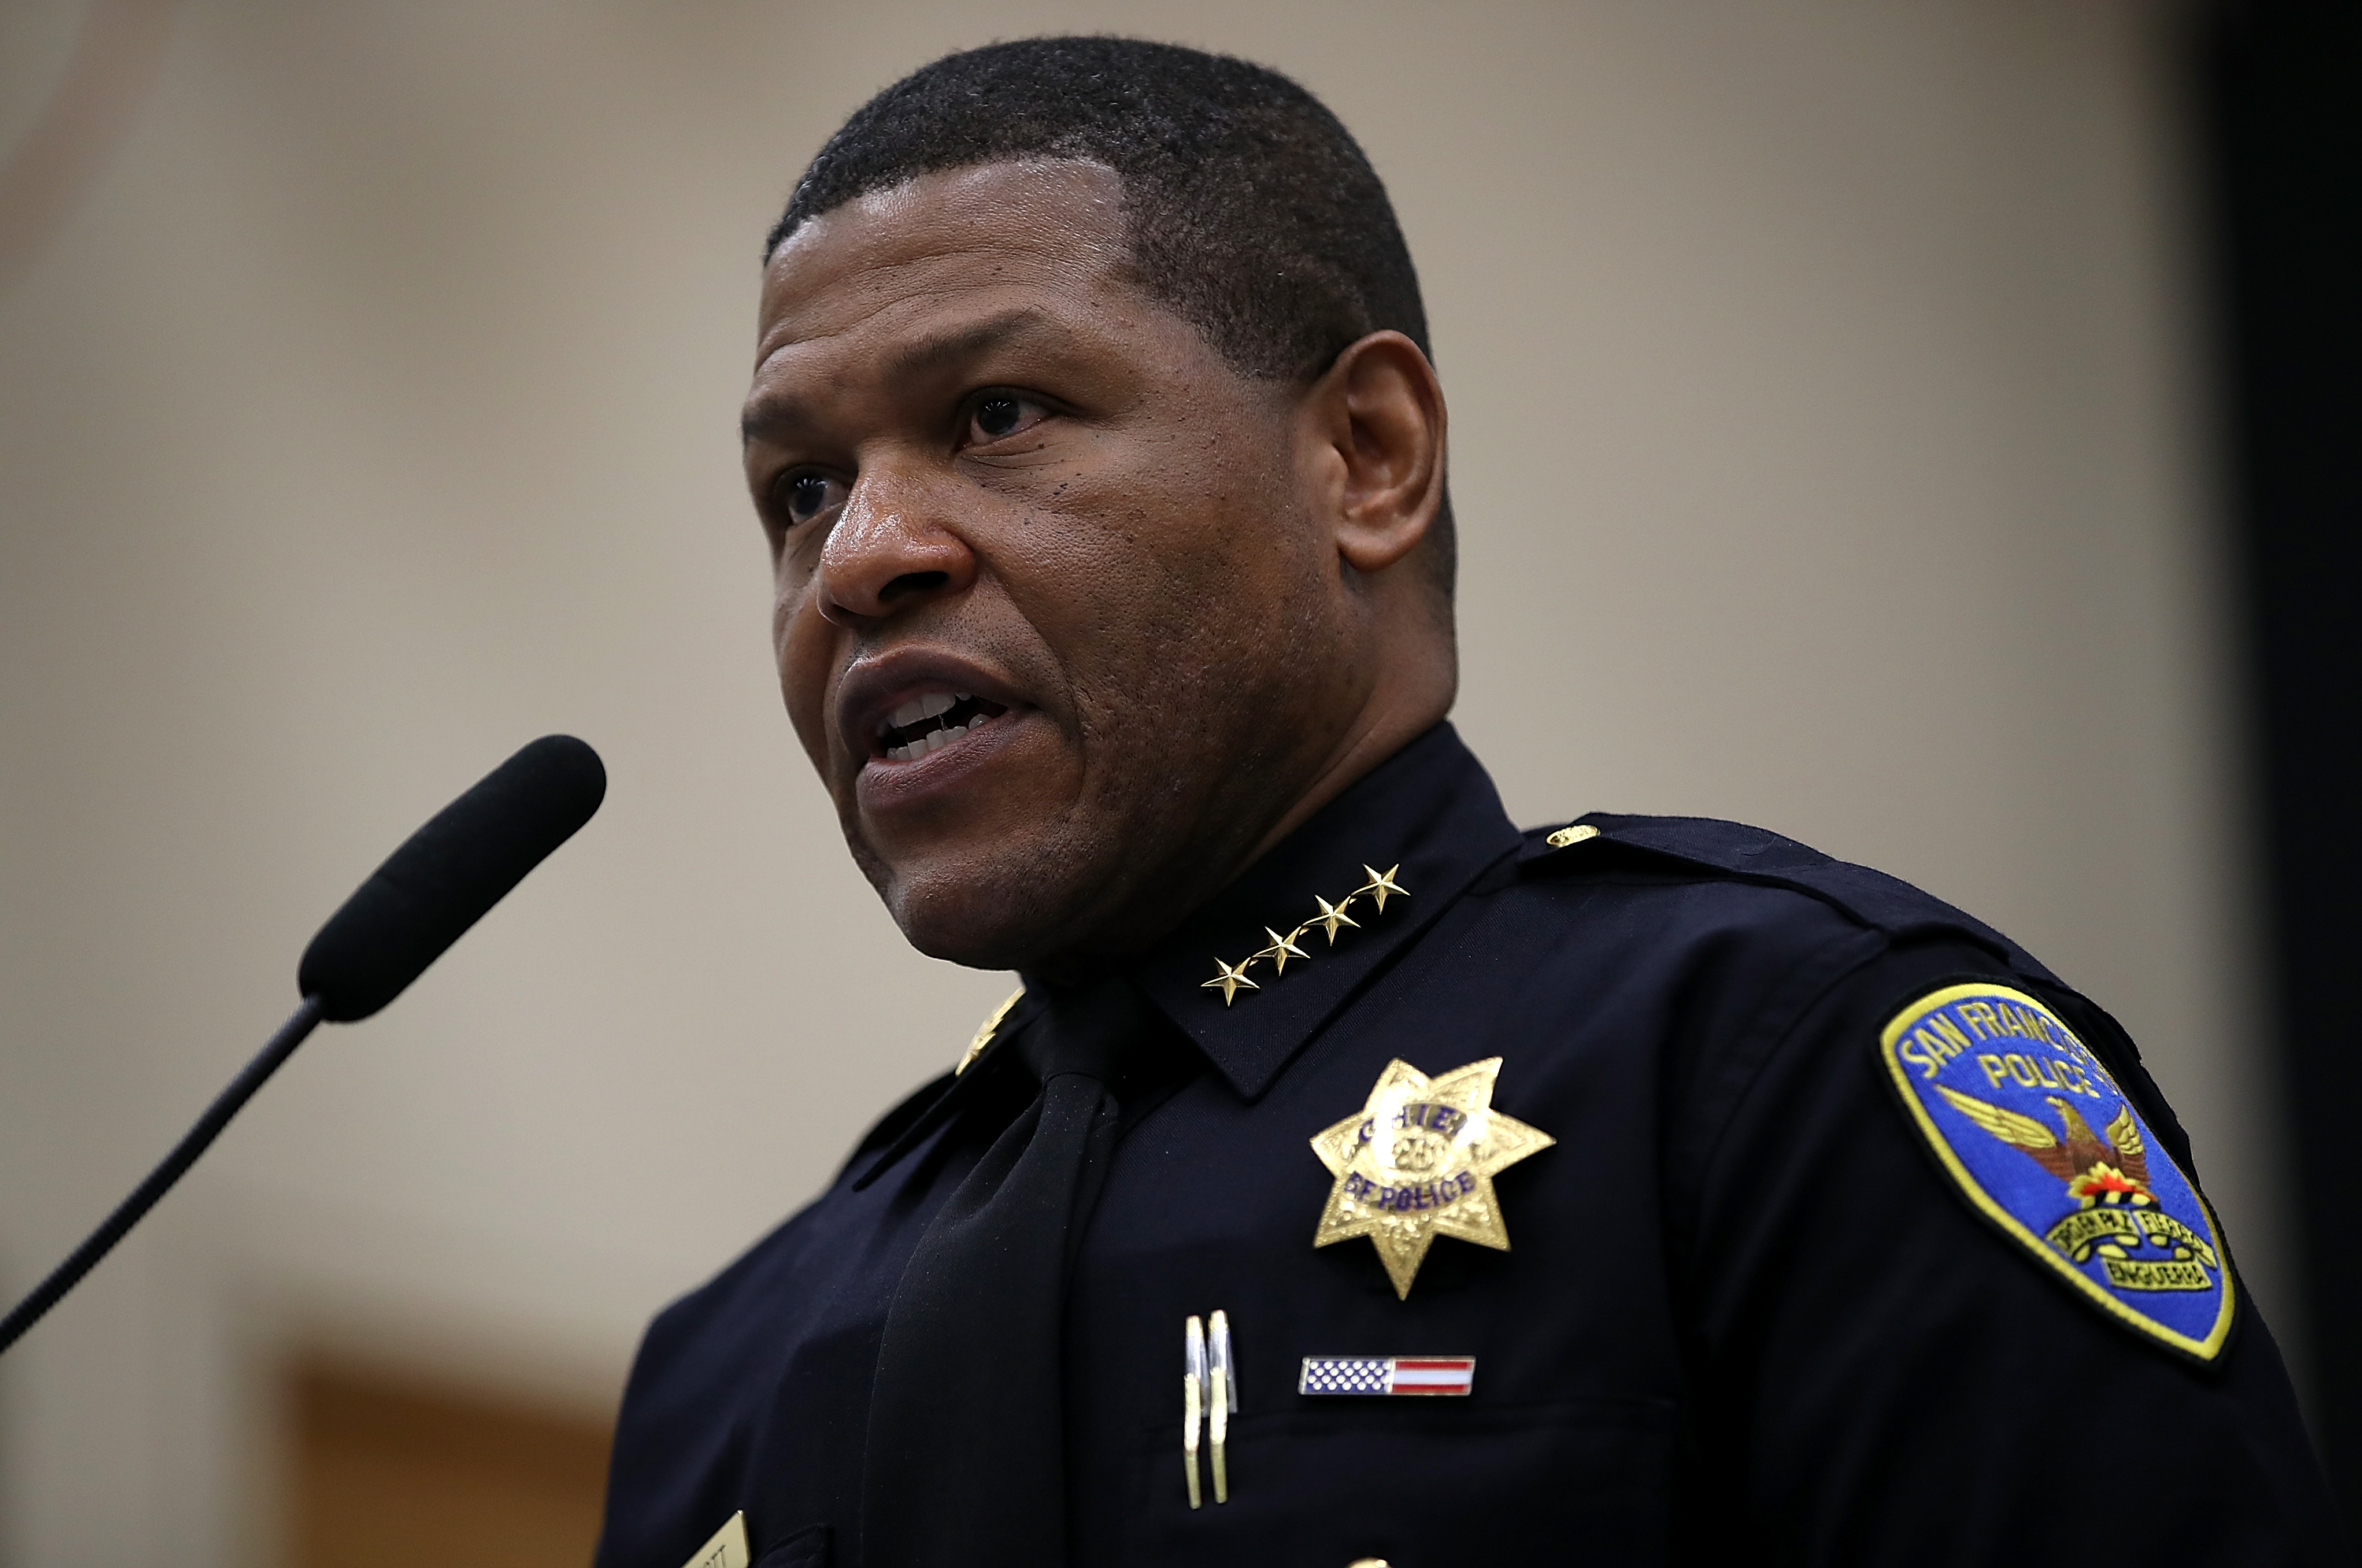 San Francisco police chief Bill Scott speaks during a news conference at the San Francisco Police Academy on May 15, 2018 in San Francisco, California. (Photo: Justin Sullivan/Getty Images)